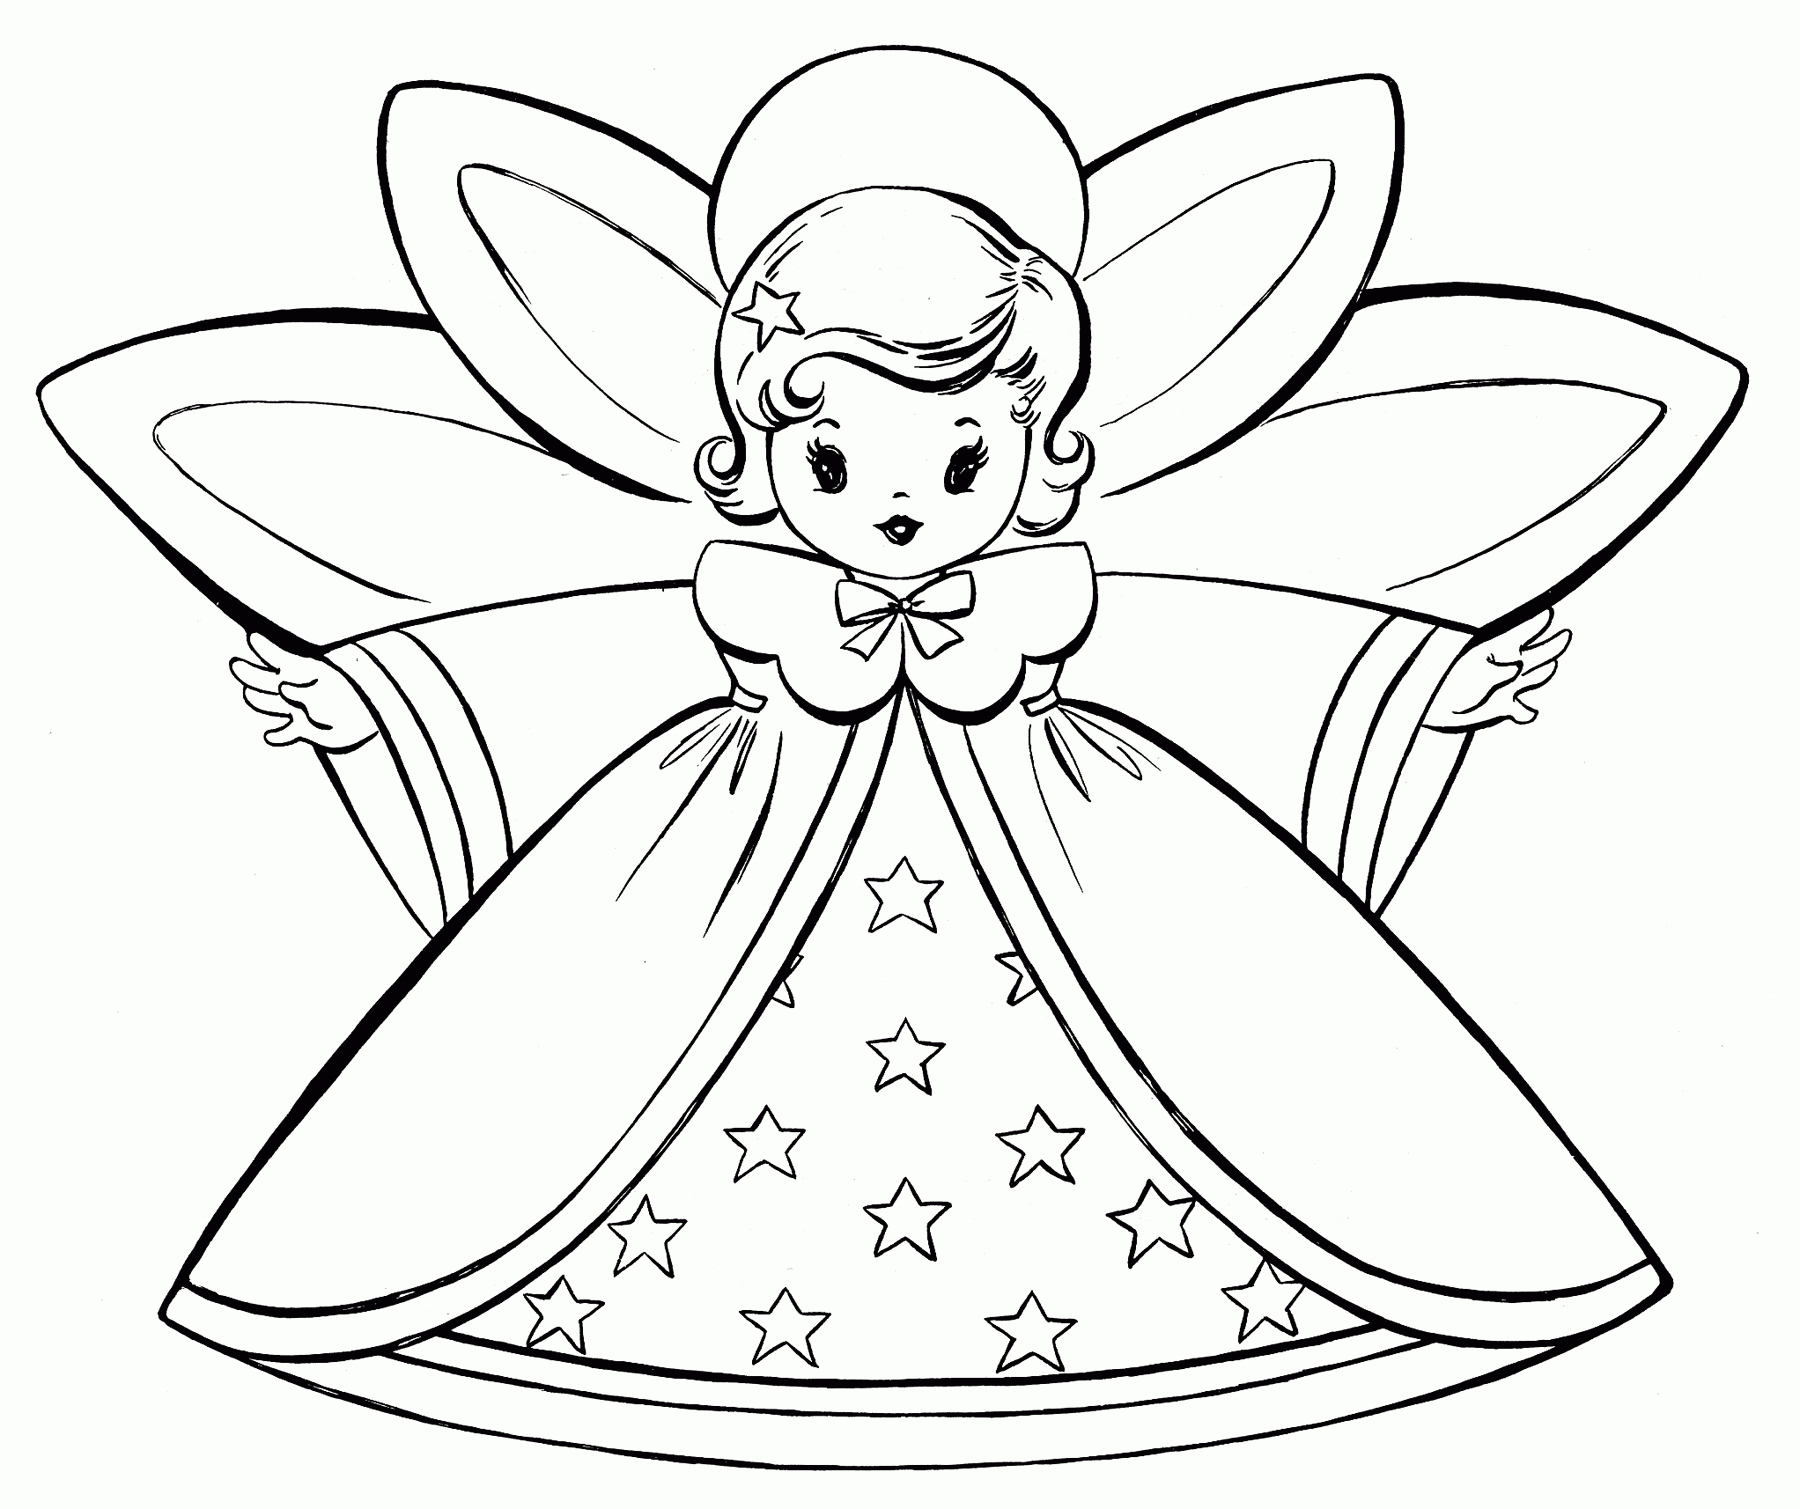 Children's Christmas Coloring Pages Free Christmas Card Coloring Pages Free Coloring Home